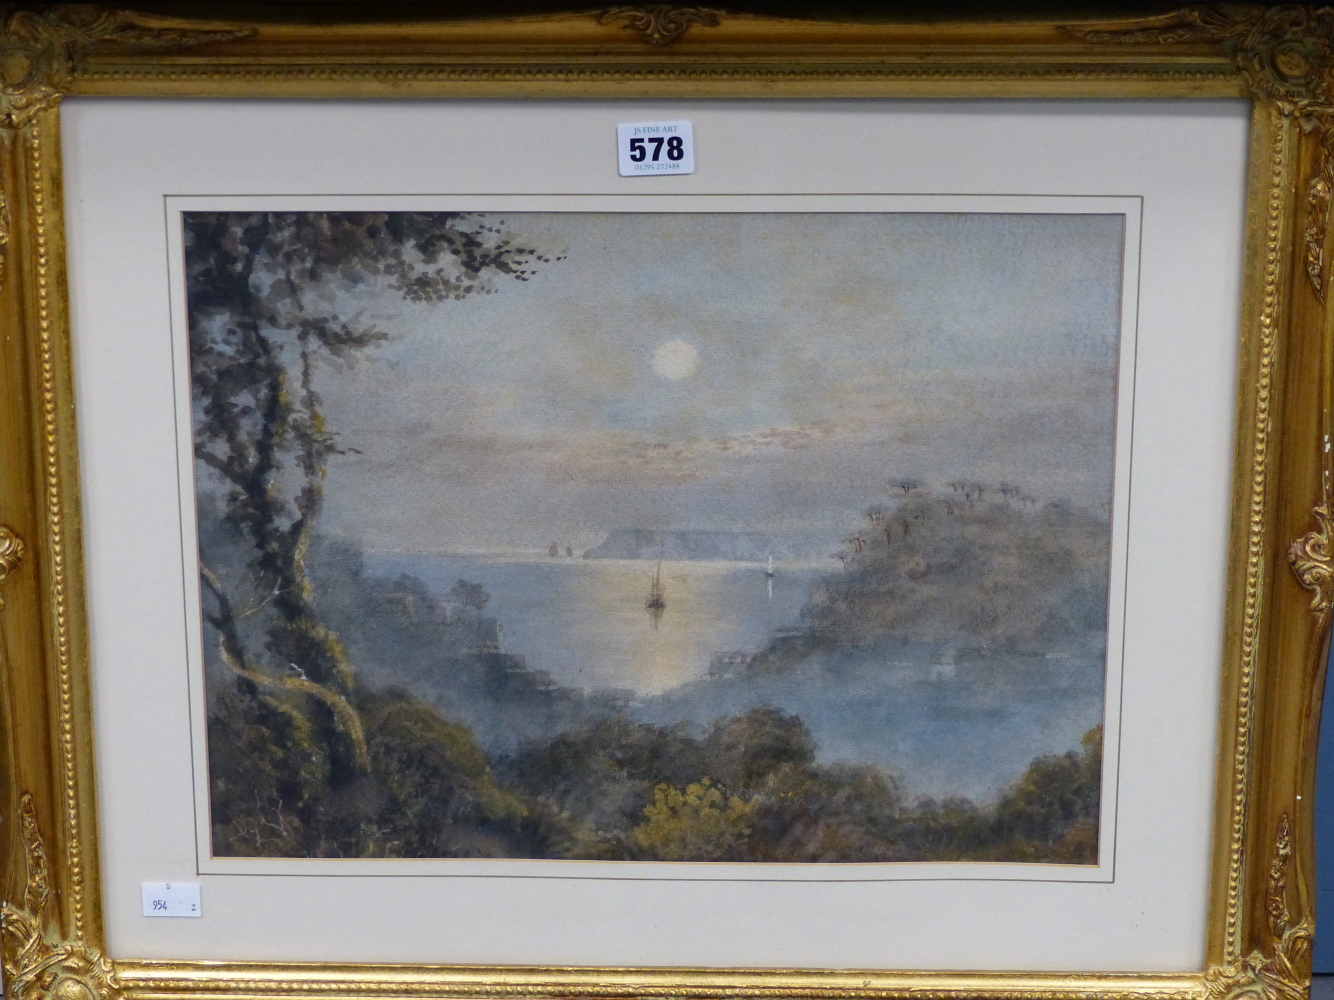 BRITISH SCHOOL (19TH CENTURY), MOONLIT COASTAL SCENE WITH BOAT IN A BAY, WATERCOLOUR, 39 x 29.5cm. - Image 2 of 6